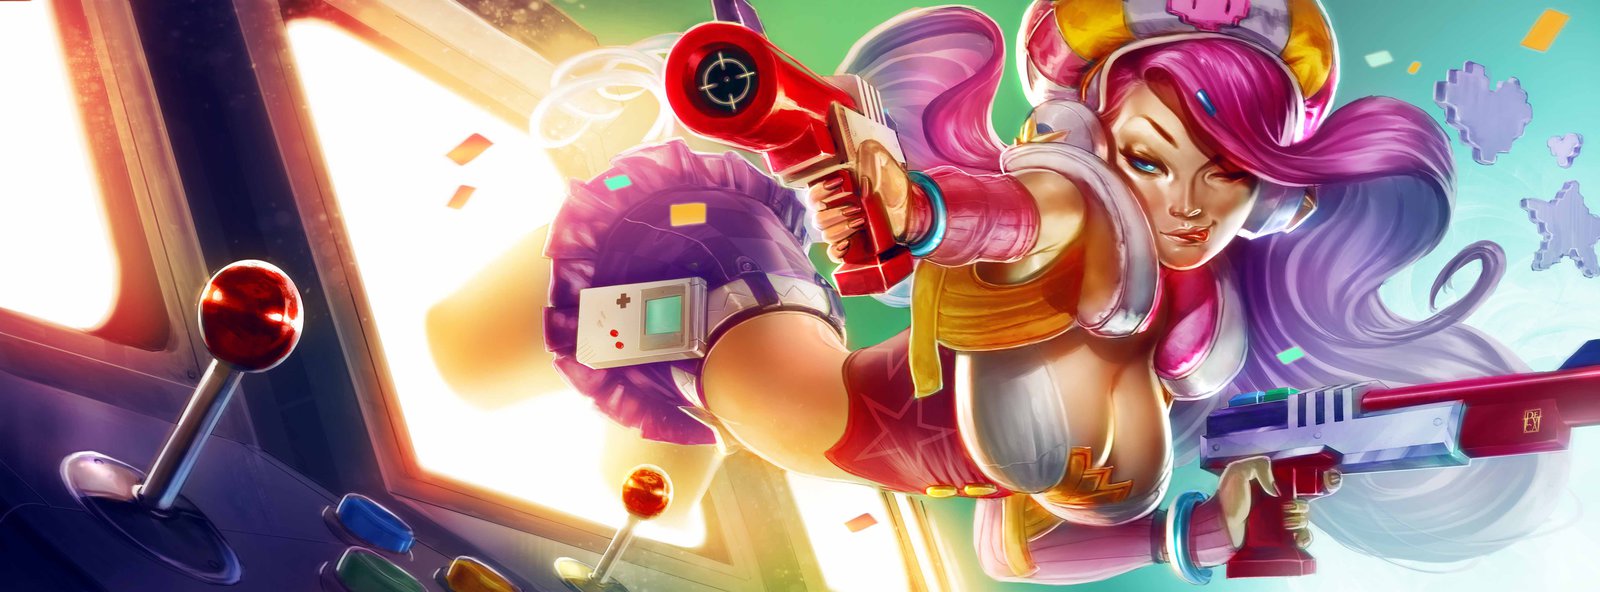 MISS FORTUNE ARCADE   LEAGUE OF LEGENDS by antoniodeluca on